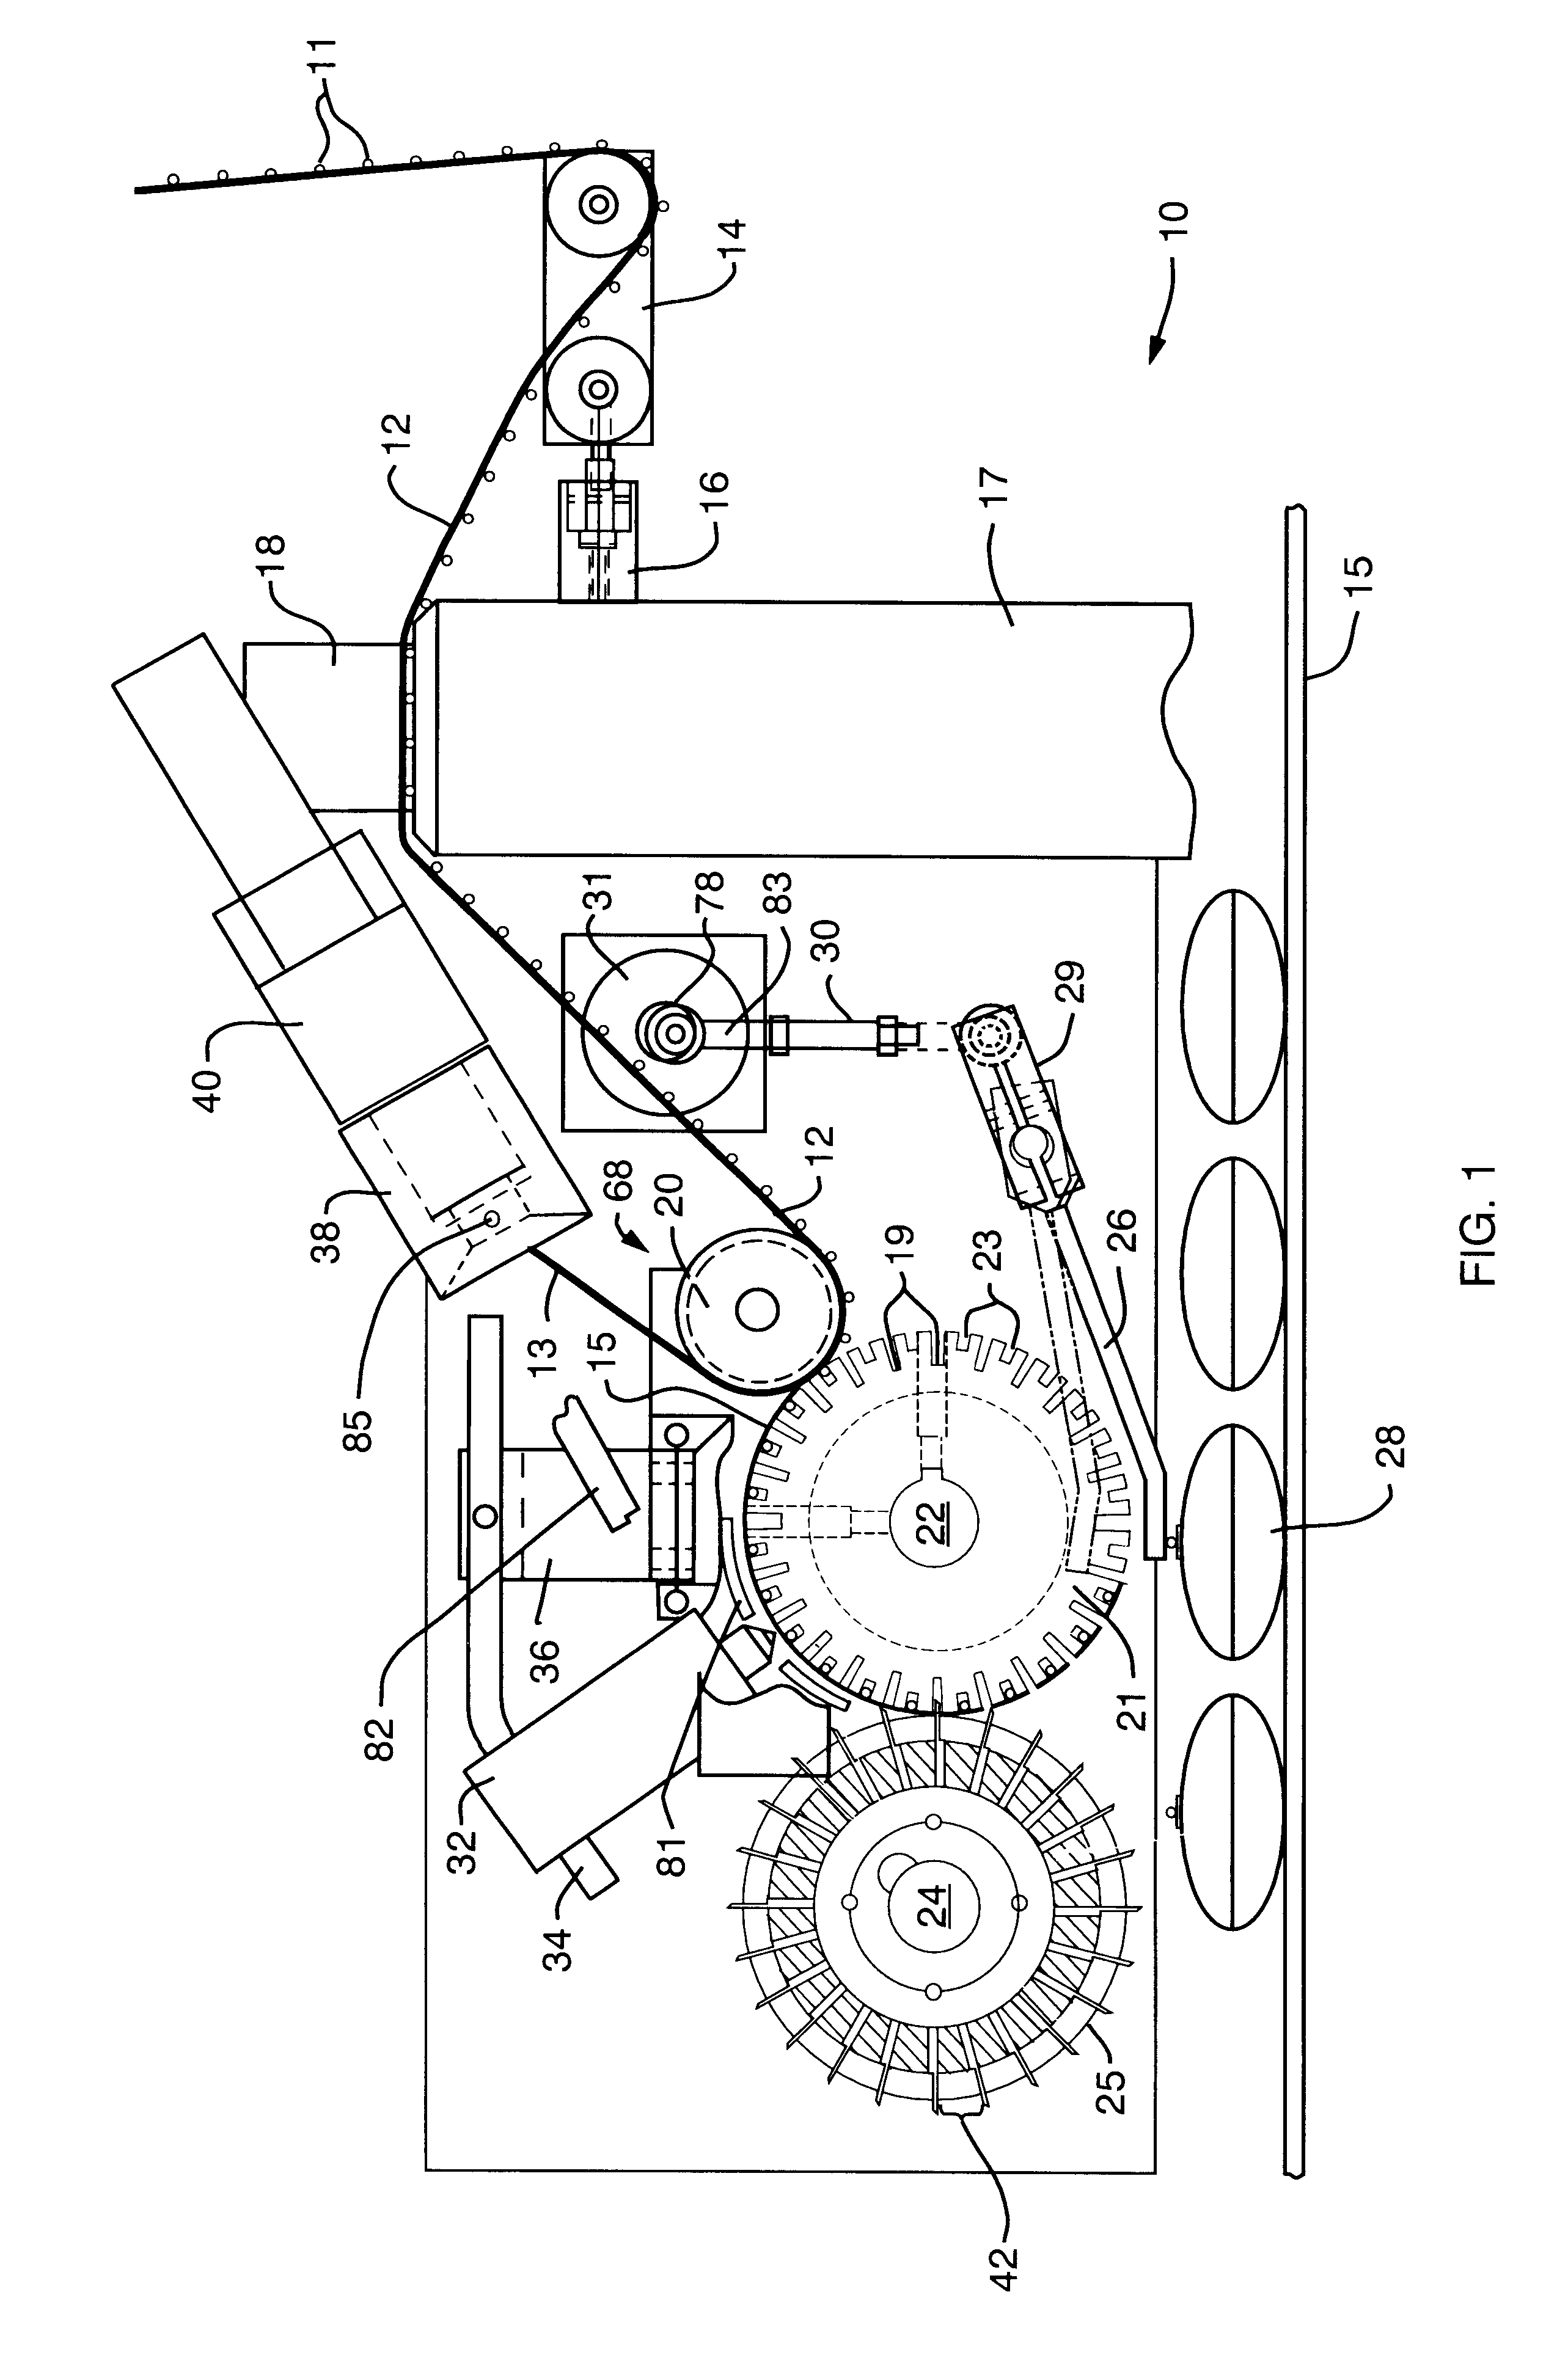 Apparatus and method for attaching straws to containers